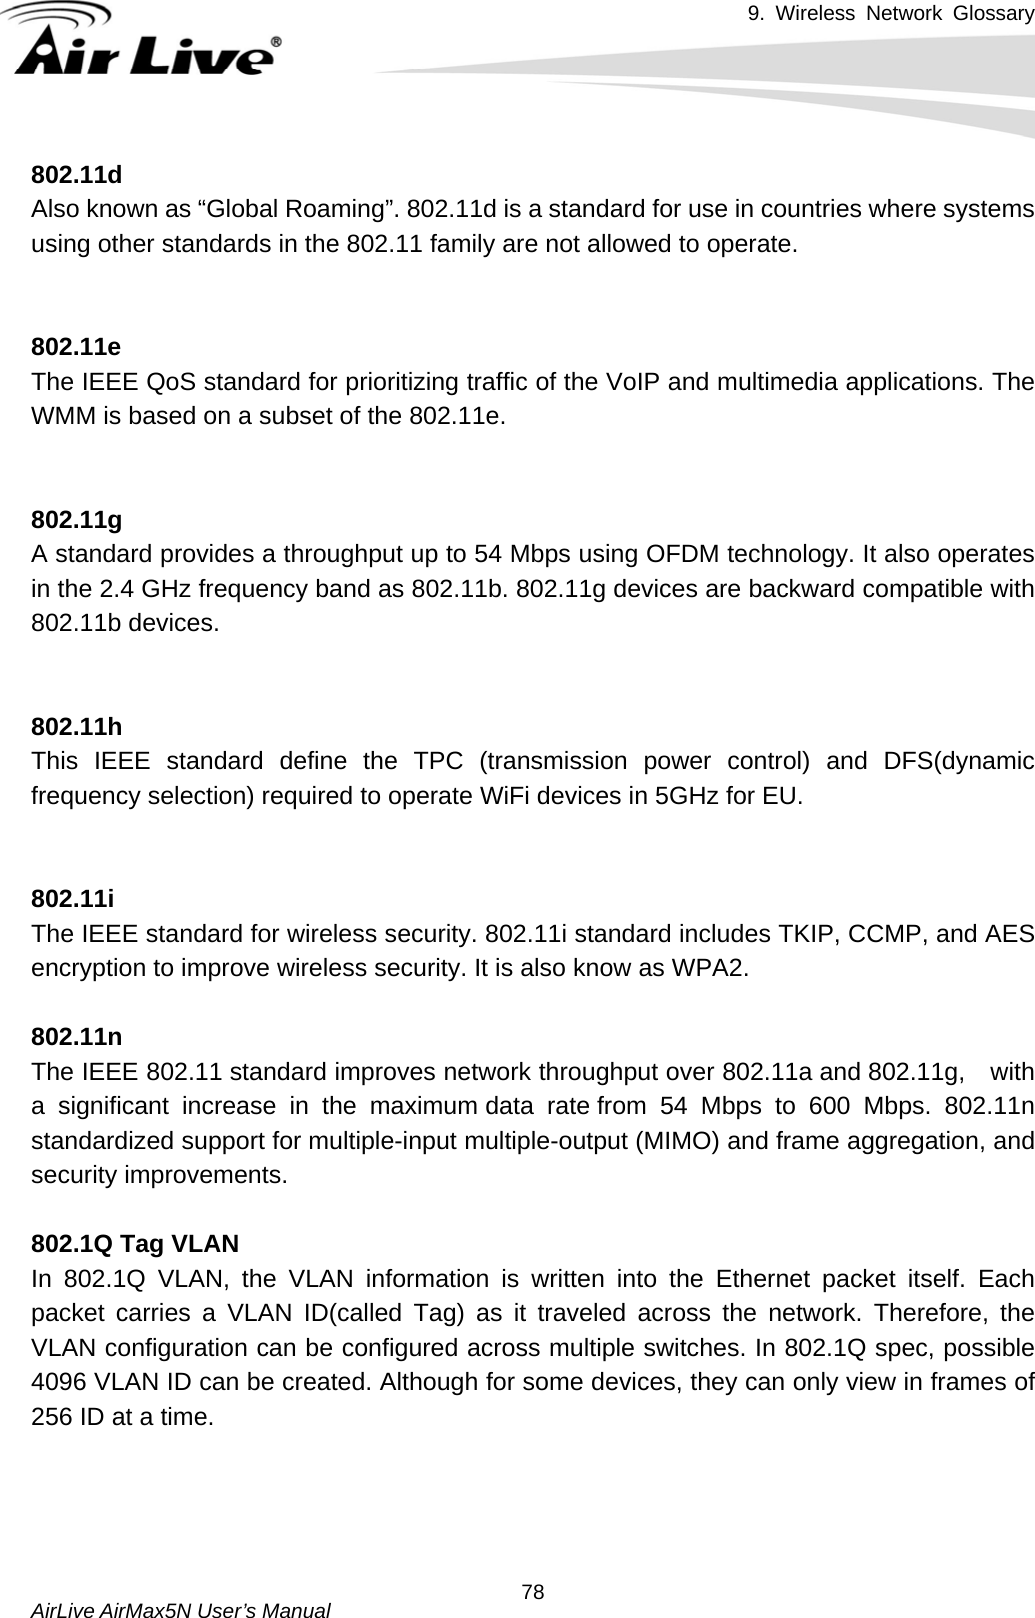 9. Wireless Network Glossary       AirLive AirMax5N User’s Manual  78802.11d Also known as “Global Roaming”. 802.11d is a standard for use in countries where systems using other standards in the 802.11 family are not allowed to operate.   802.11e The IEEE QoS standard for prioritizing traffic of the VoIP and multimedia applications. The WMM is based on a subset of the 802.11e.   802.11gA standard provides a throughput up to 54 Mbps using OFDM technology. It also operates in the 2.4 GHz frequency band as 802.11b. 802.11g devices are backward compatible with 802.11b devices.   802.11h This IEEE standard define the TPC (transmission power control) and DFS(dynamic frequency selection) required to operate WiFi devices in 5GHz for EU.   802.11i The IEEE standard for wireless security. 802.11i standard includes TKIP, CCMP, and AES encryption to improve wireless security. It is also know as WPA2.  802.11n The IEEE 802.11 standard improves network throughput over 802.11a and 802.11g,  with a significant increase in the maximum data rate from 54 Mbps to 600 Mbps. 802.11n standardized support for multiple-input multiple-output (MIMO) and frame aggregation, and security improvements.  802.1Q Tag VLANIn 802.1Q VLAN, the VLAN information is written into the Ethernet packet itself. Each packet carries a VLAN ID(called Tag) as it traveled across the network. Therefore, the VLAN configuration can be configured across multiple switches. In 802.1Q spec, possible 4096 VLAN ID can be created. Although for some devices, they can only view in frames of 256 ID at a time.     